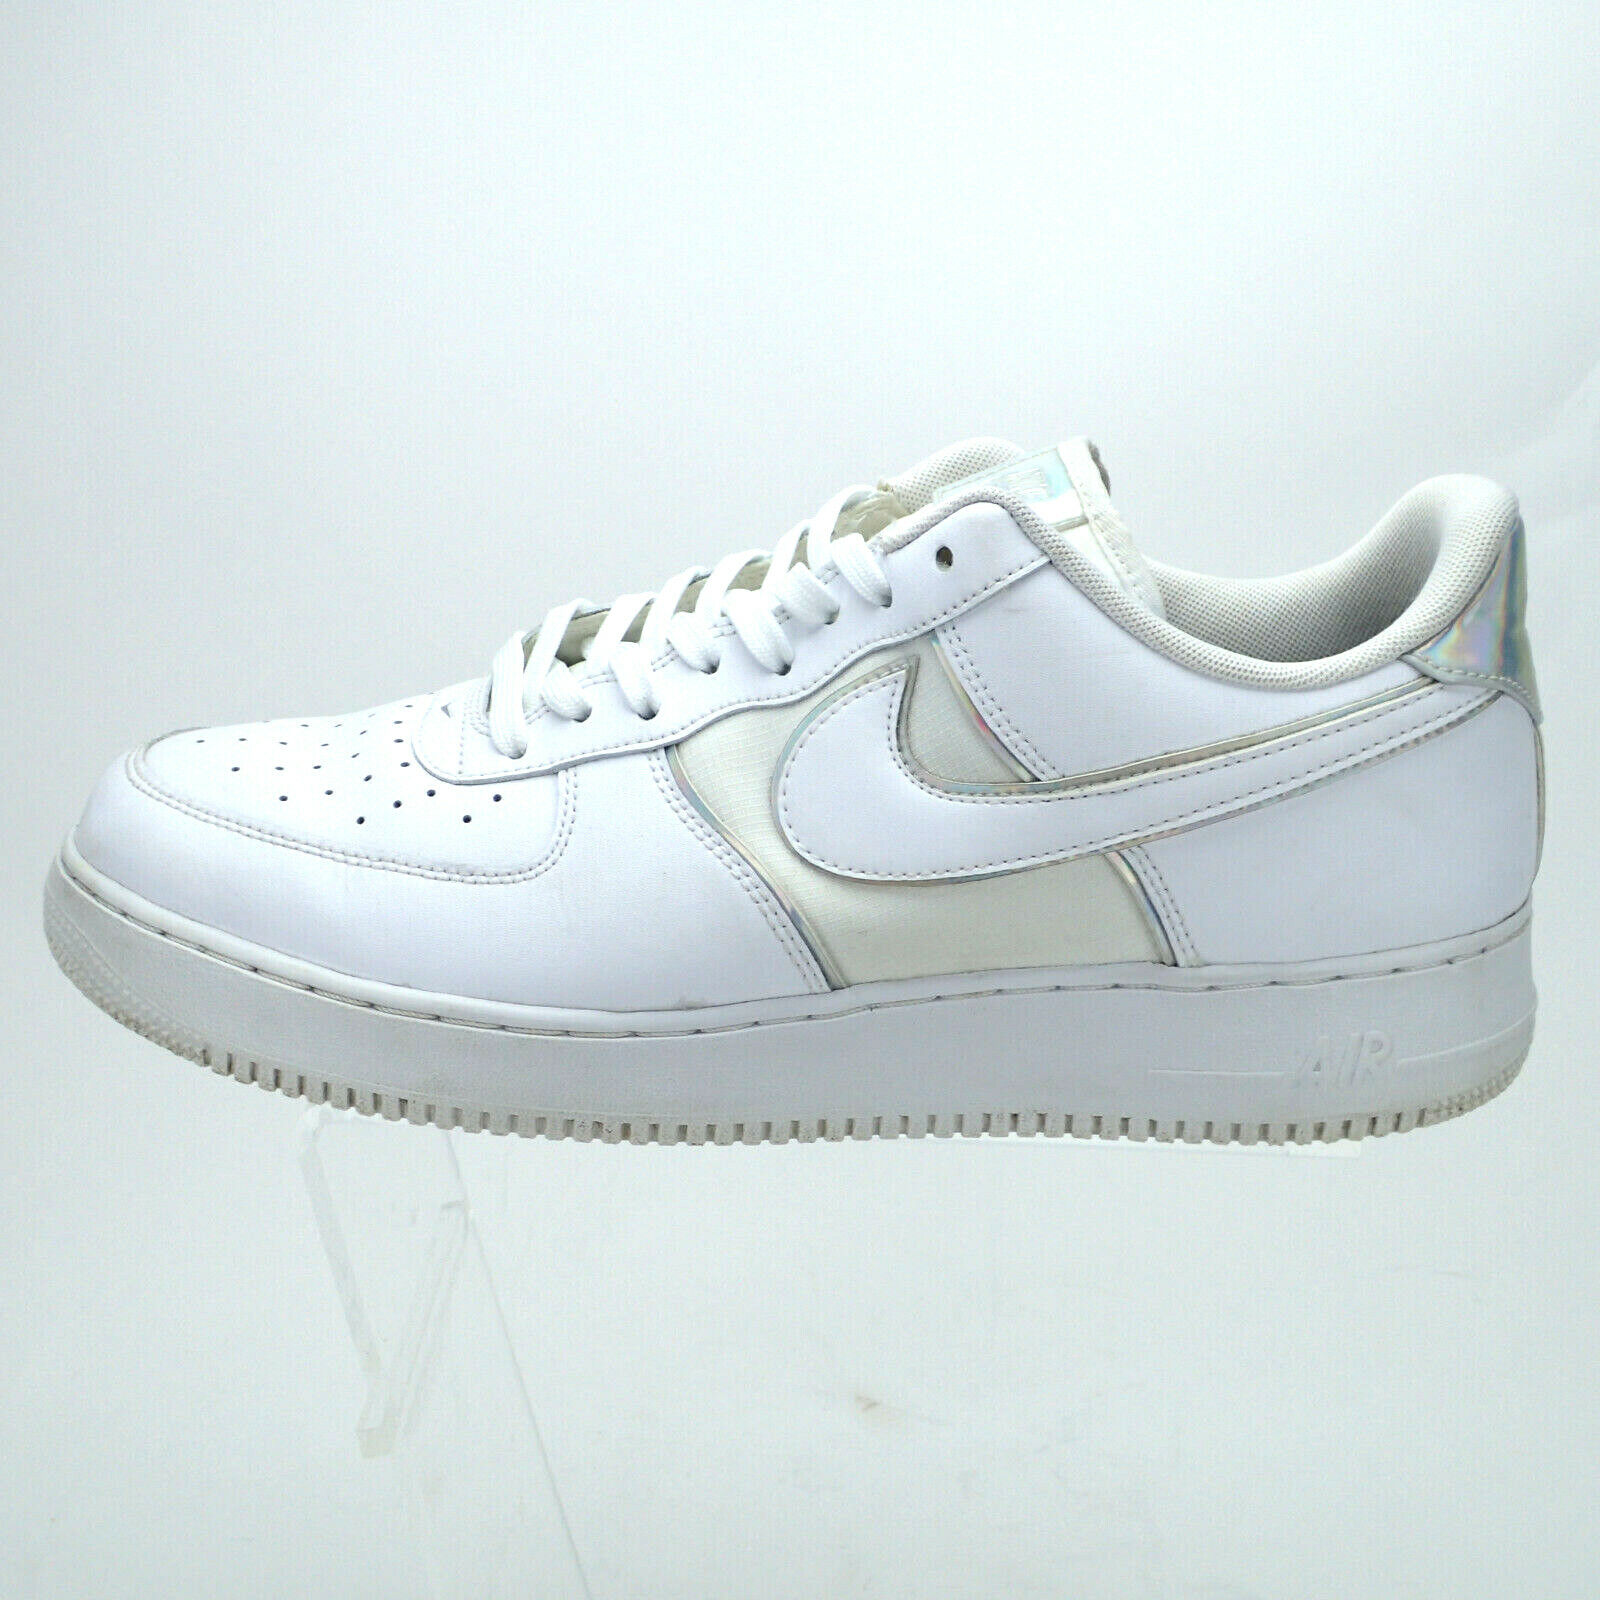 Above head and shoulder Tear tape Nike Air Force 1 07 LV8 White Iridescent Silver AF1 AT6147-100 Men&#039;s  Size 13 | eBay